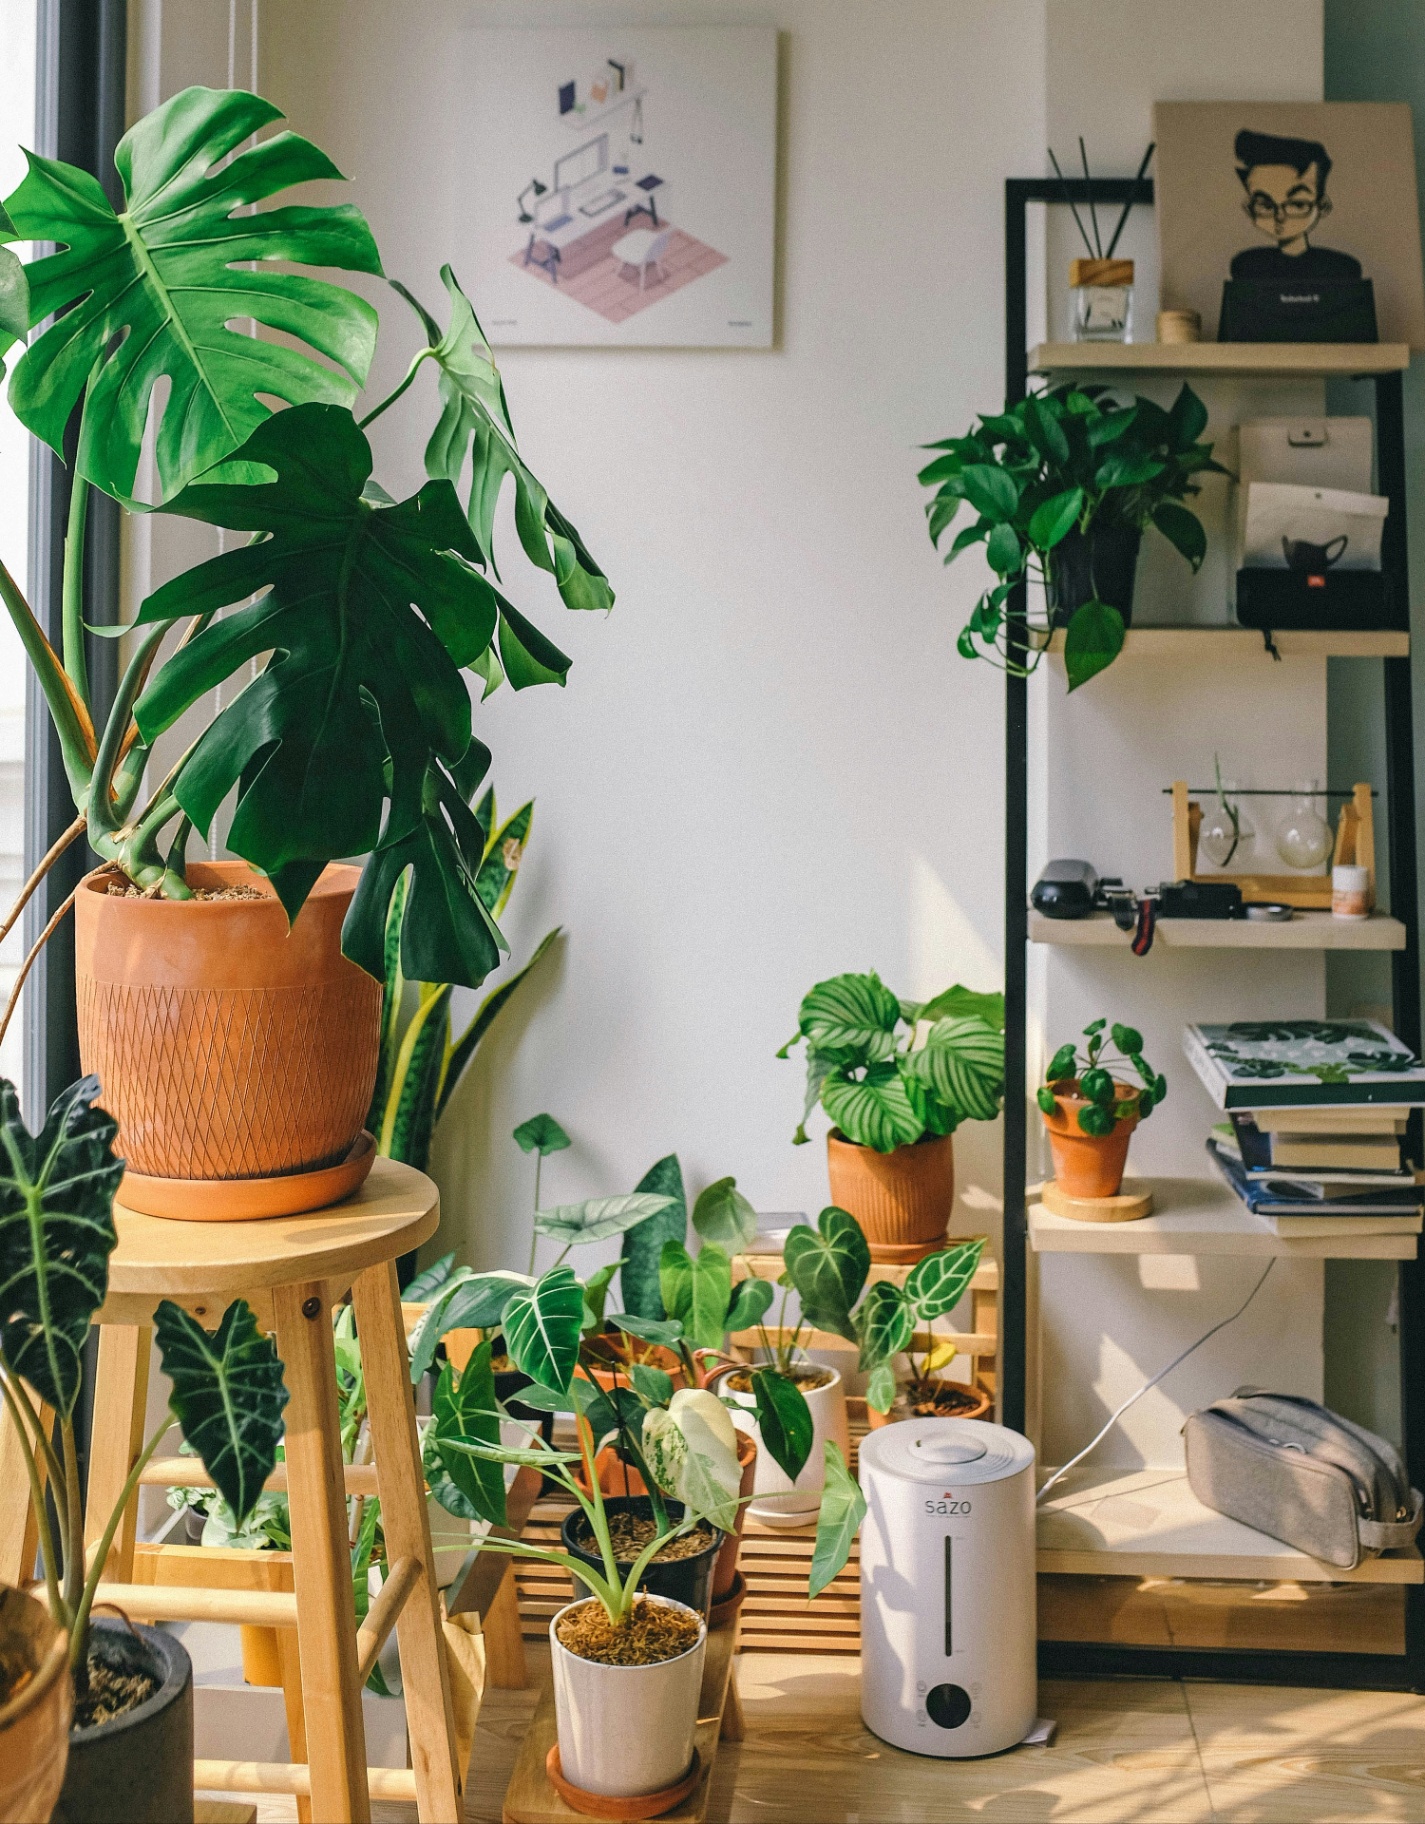 A group of plants in an office near a window. This could symbolize the benefits of plants that a delray beach mental health therapist can help you realize. Learn more about trauma therapy in Delray Beach, FL and how Palm Beach County, FL therapy can help you today.